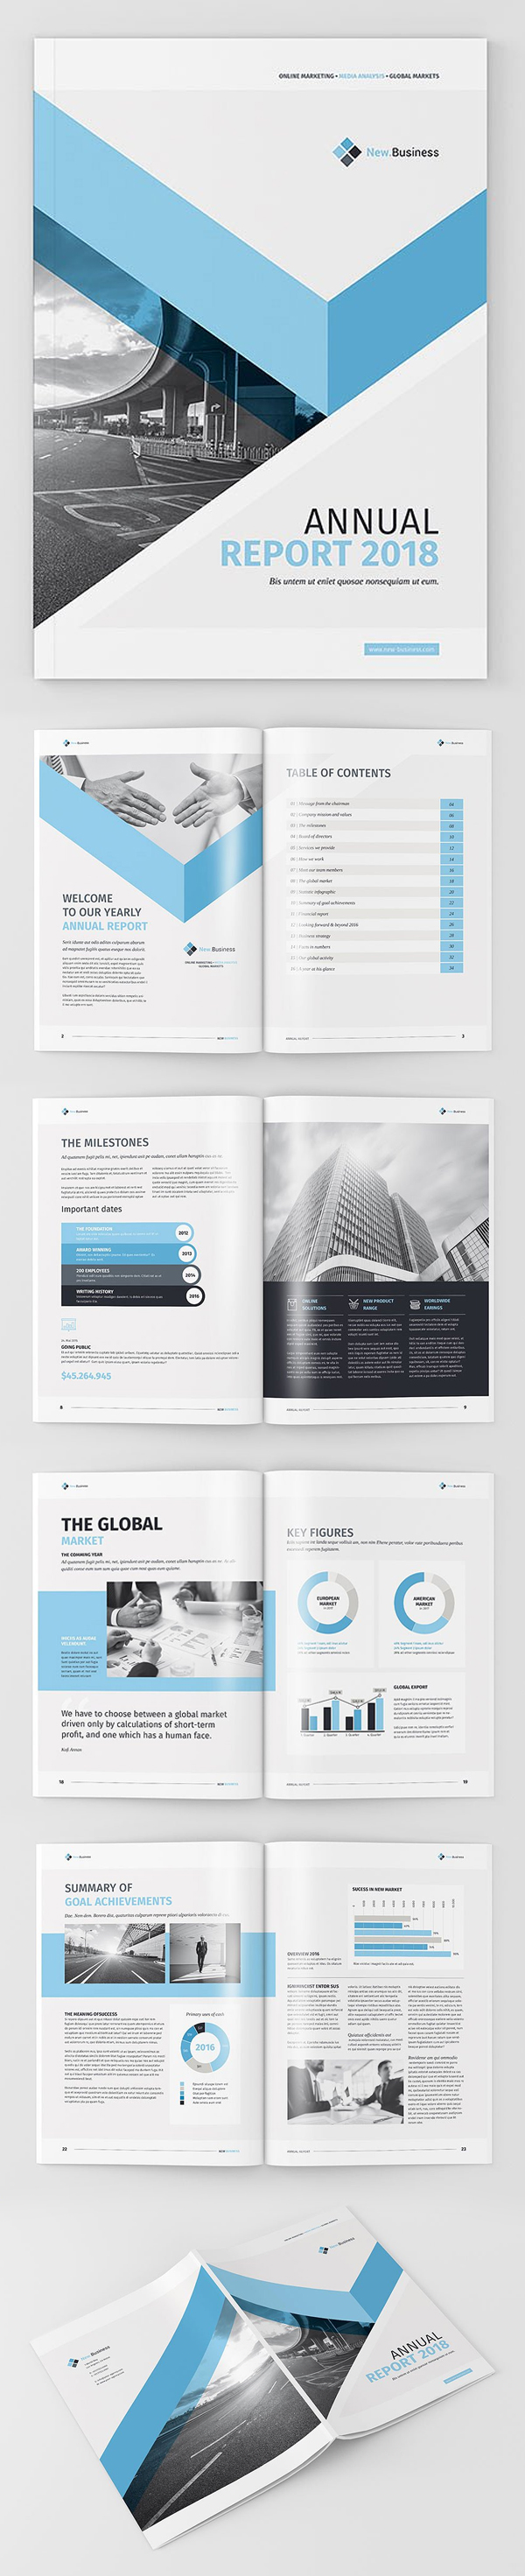 Professional Annual Report 2018 Template